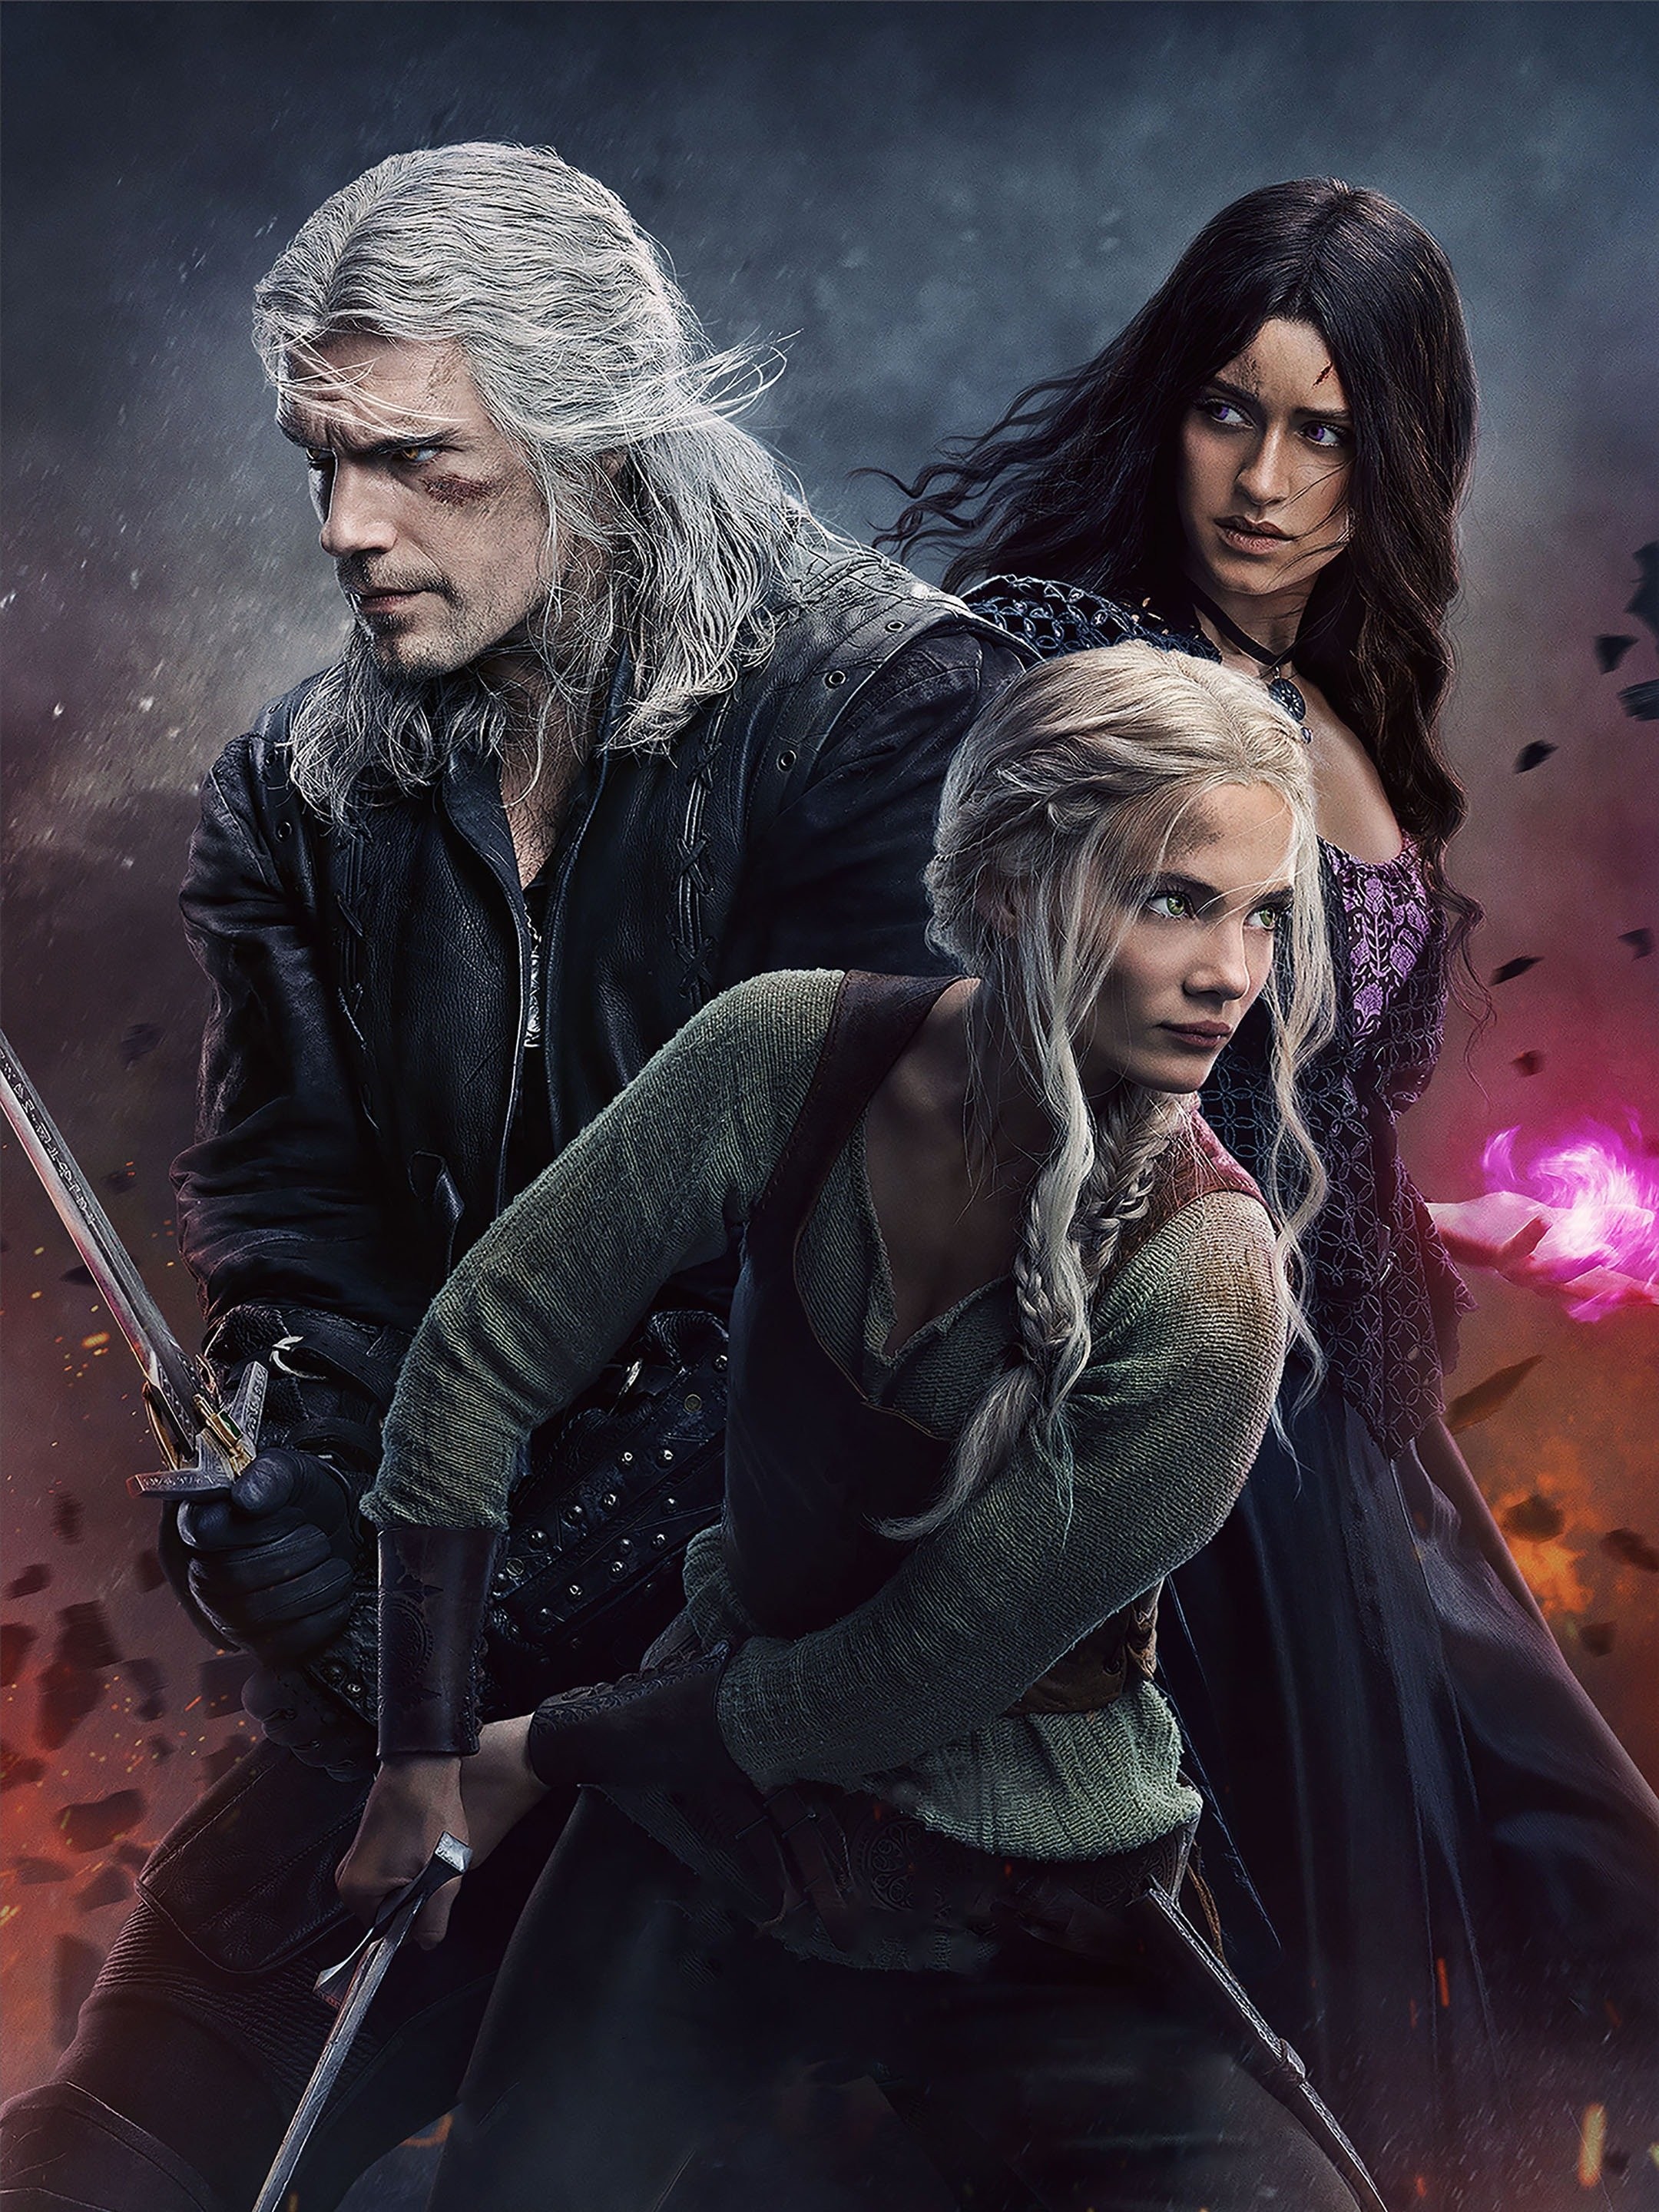 The Witcher 3: Wild Hunt - Hearts of Stone (Video Game 2015) - IMDb